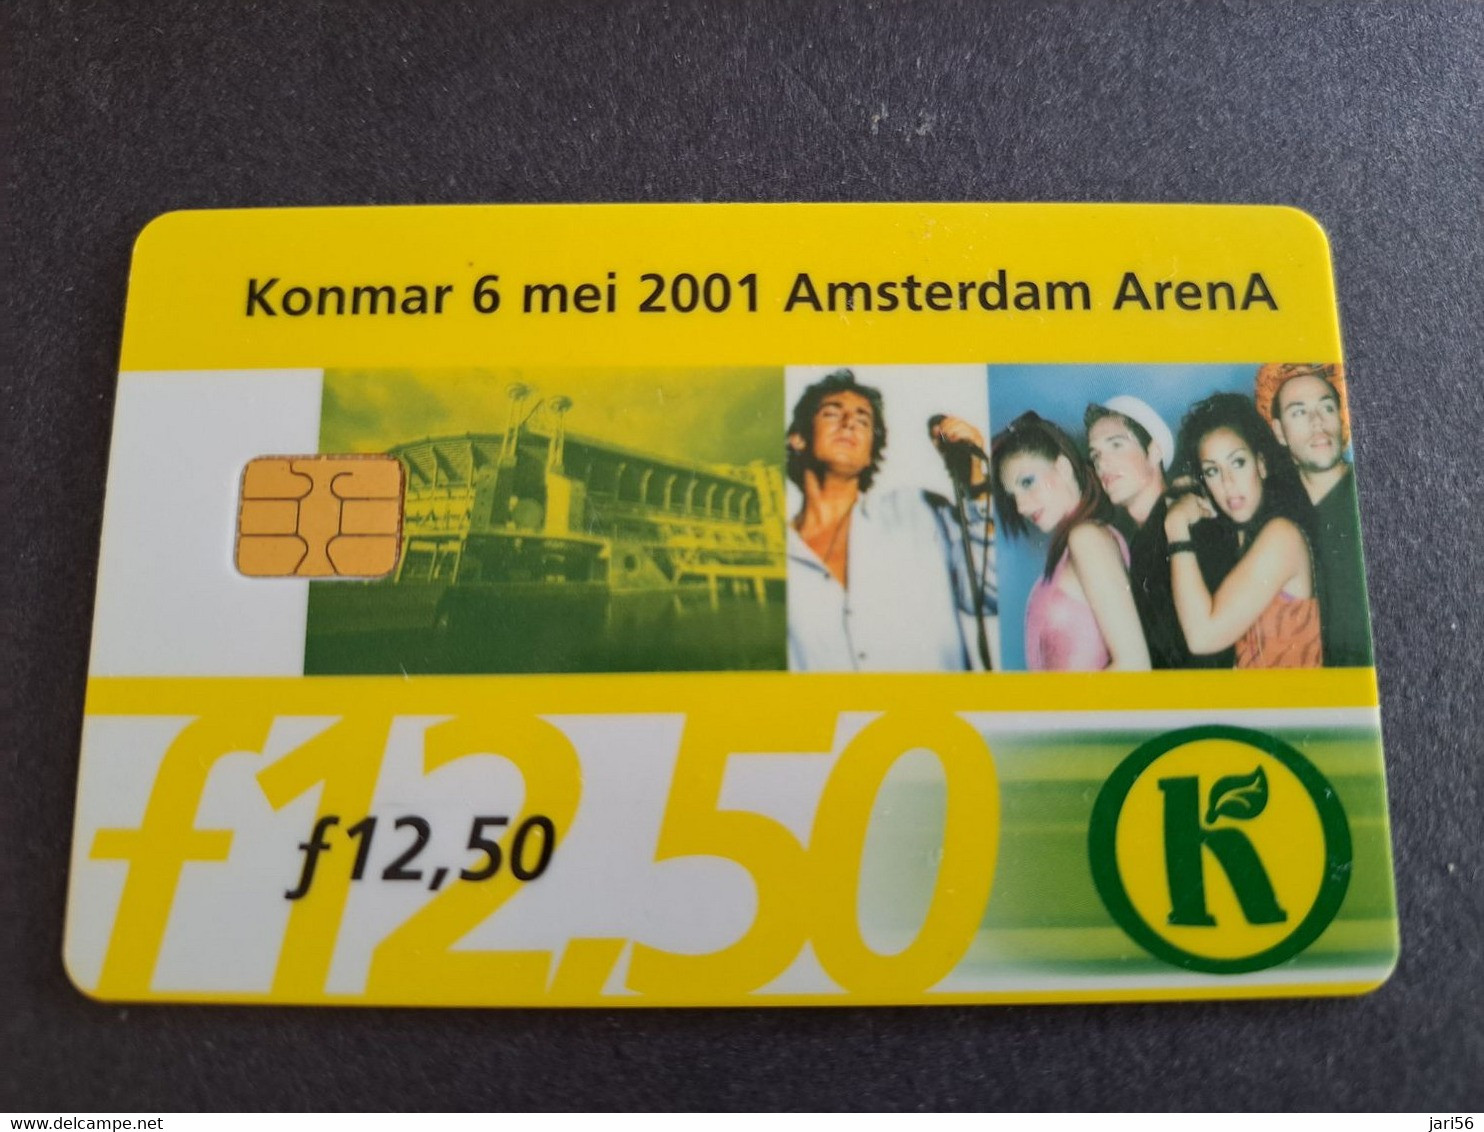 NETHERLANDS CHIPCARD HFL 12,50 ,- ARENA CARD / KONMAR     /MUSIC   - USED CARD  ** 10364** - Publiques